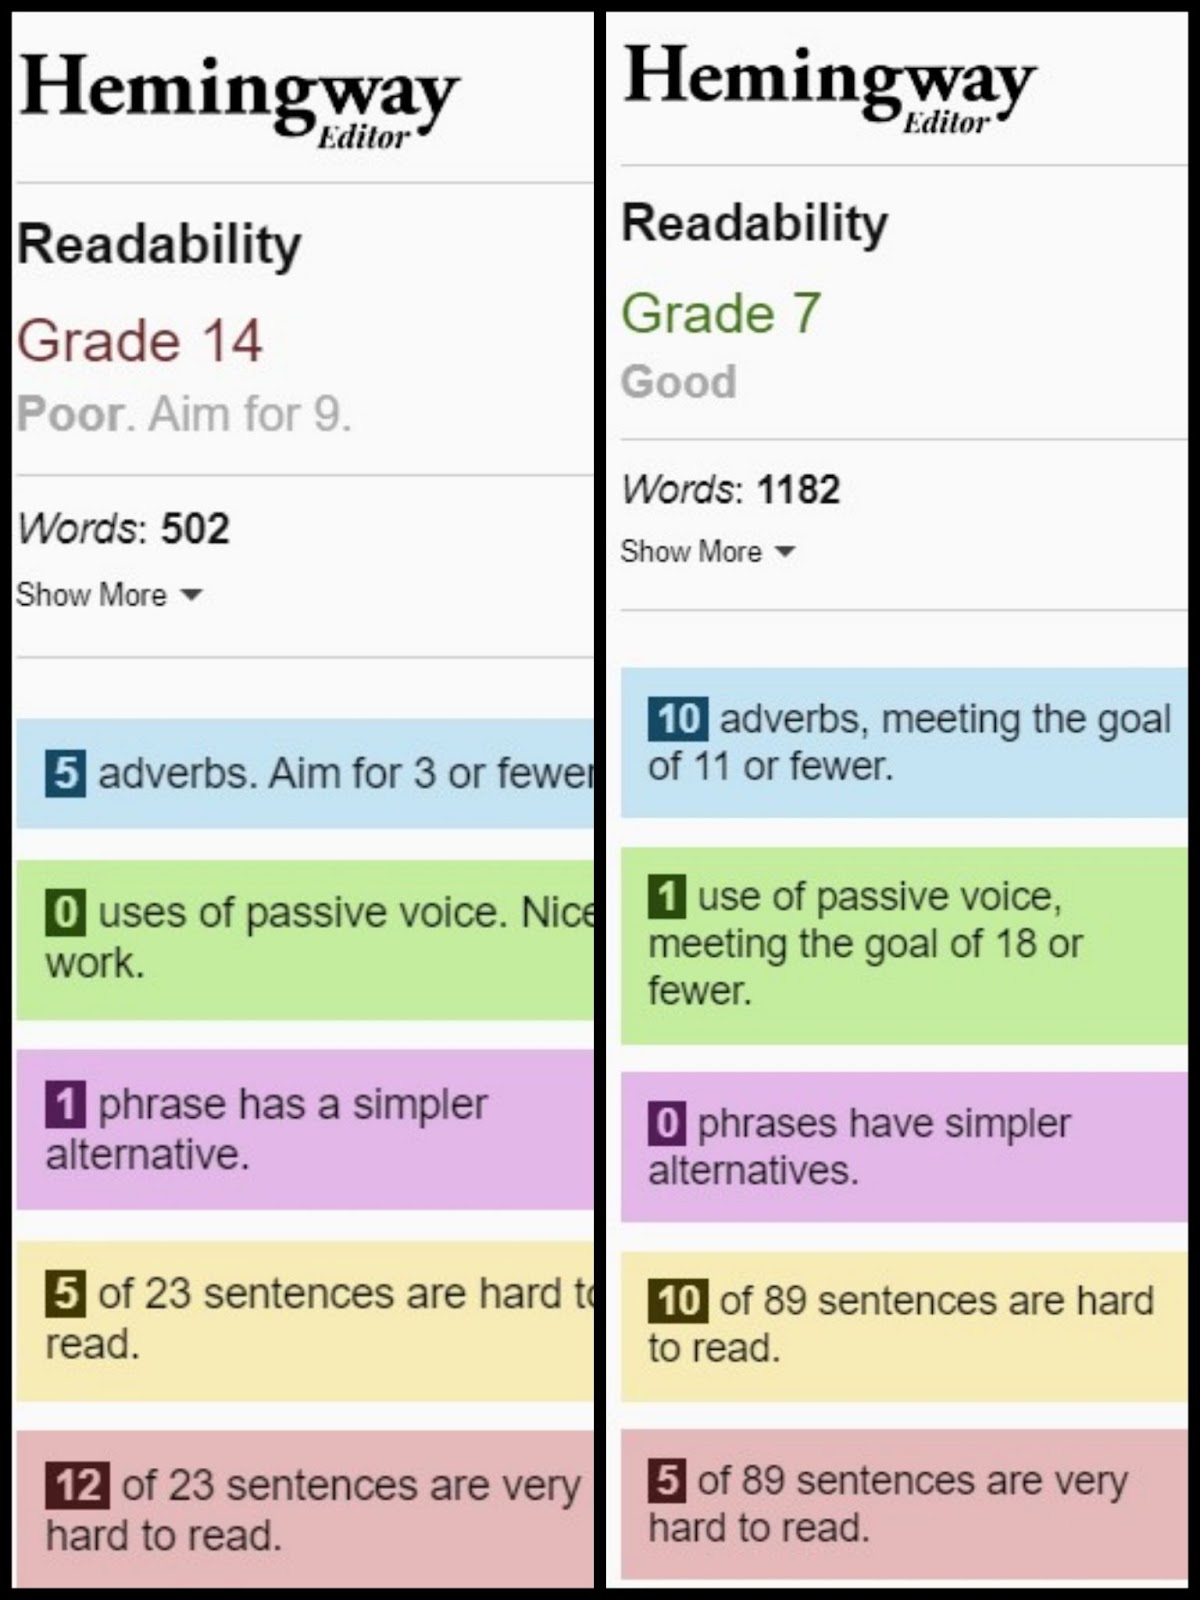 Screenshots of stats from the Hemmingway App showing readability statistics for Chat GTP's blog and my original blog.
